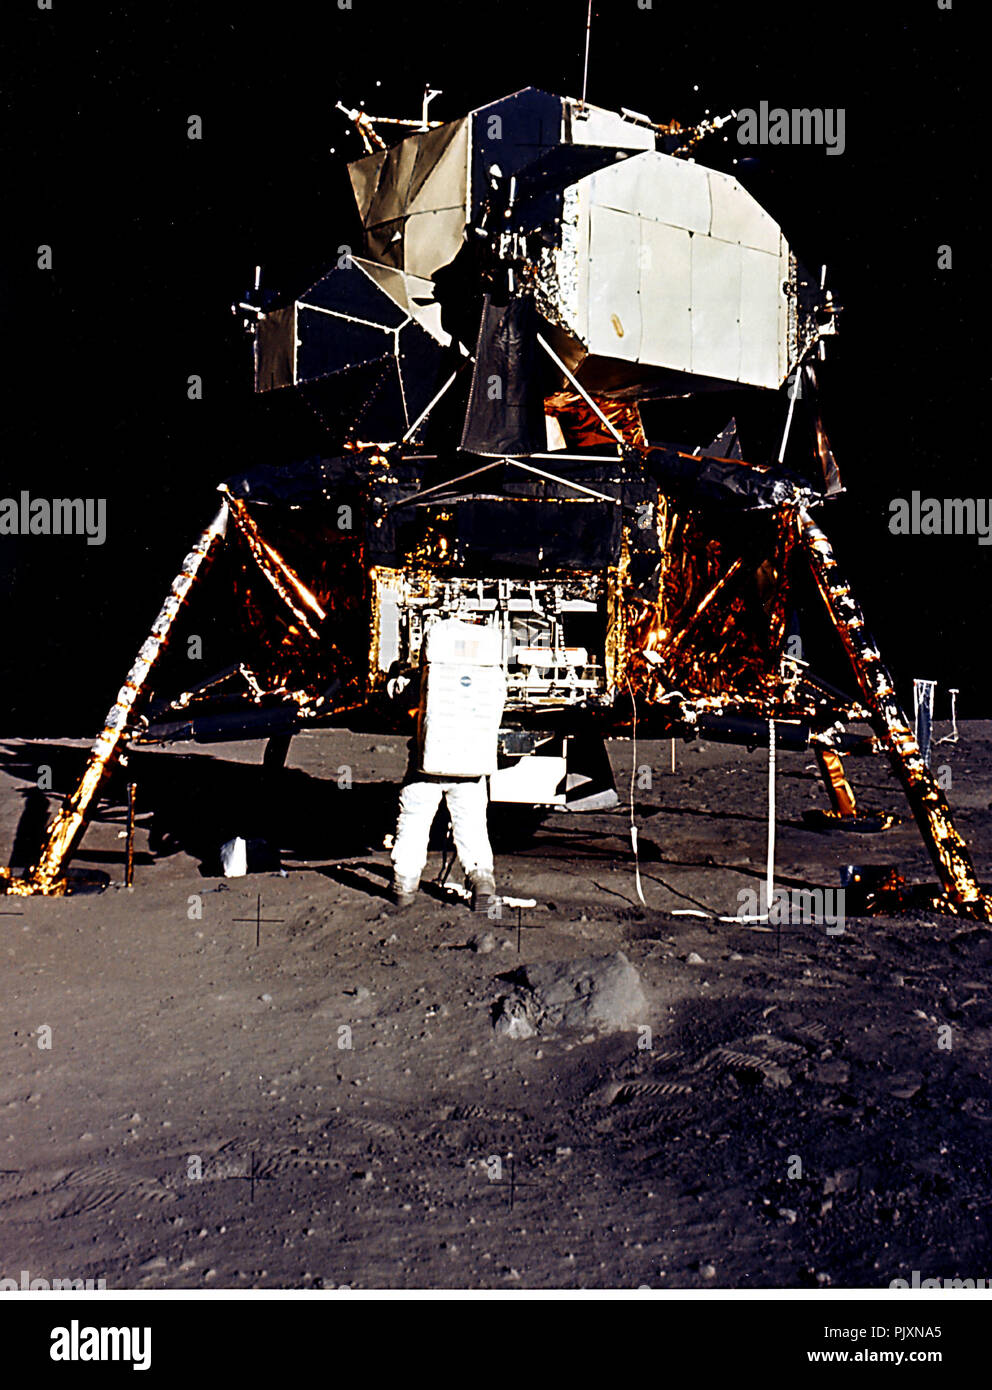 The Moon - (FILE) -- Man's first landing on the Moon was accomplished at 4:17 p.m. on Sunday, July 20, 1969 as Lunar module 'Eagle' touched down gently on the Sea of Tranquility on the east side of the Moon. Astronaut Edwin E. Aldrin Jr., Lunar Module Pilot, removes scientific experiment packages from a stowage area in the Lunar Module's descent stage. Left behind on the lunar surface by Aldrin and Neil A. Armstrong, Apollo 11 Commander, were a Passive Seismic Experiments Package and a Laser Ranging Retro Reflector.  Credit: NASA / CNP /MediaPunch Stock Photo